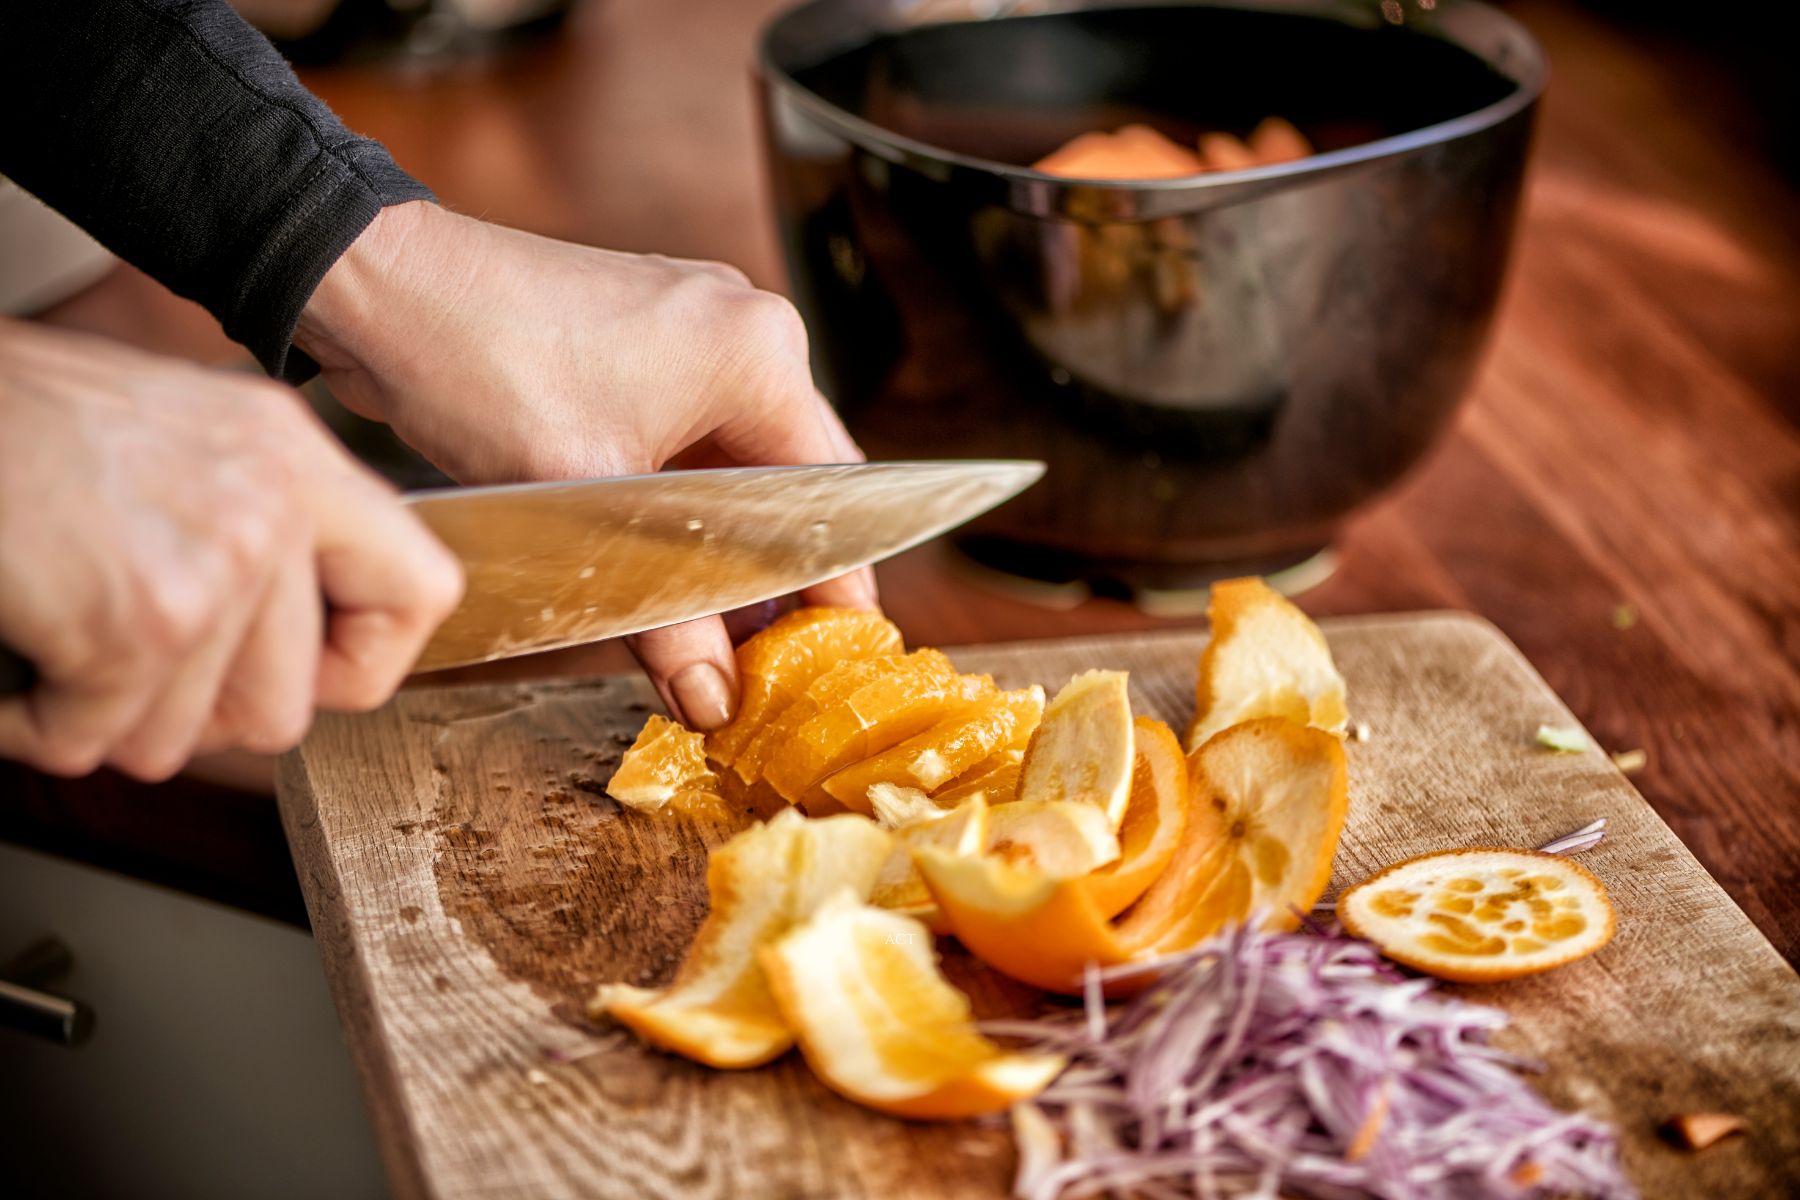 Personal Chef vs Private Chef: What’s the Difference & Why Does It Matter?